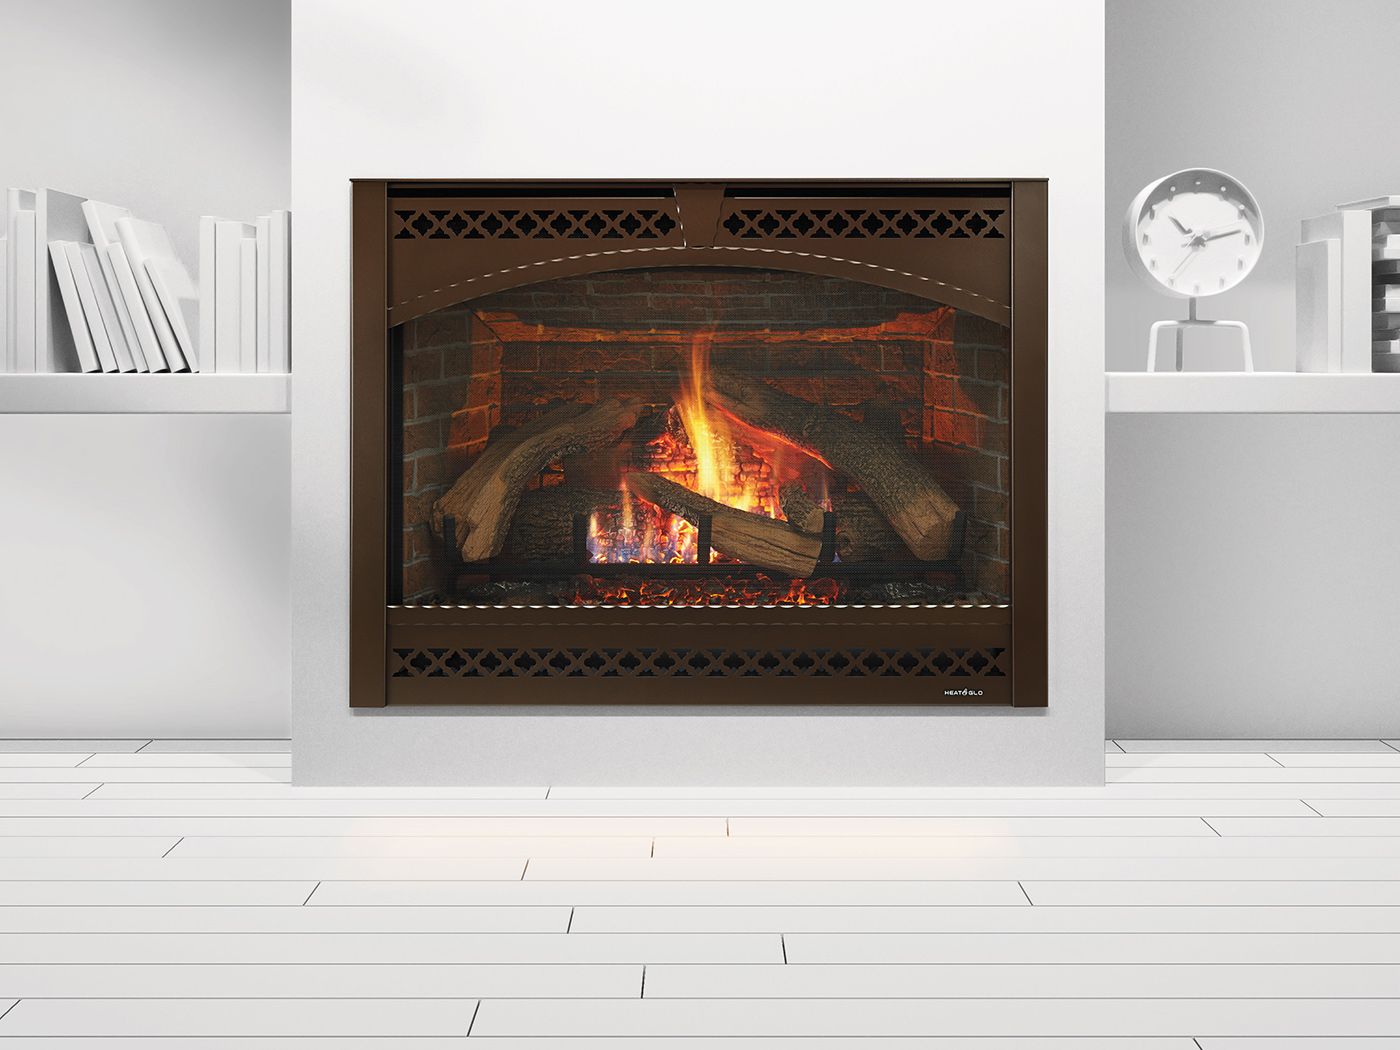 Heat Glo Fireplace New Heat and Glo Fireplace Cleaning Heatnglo True42 Gas